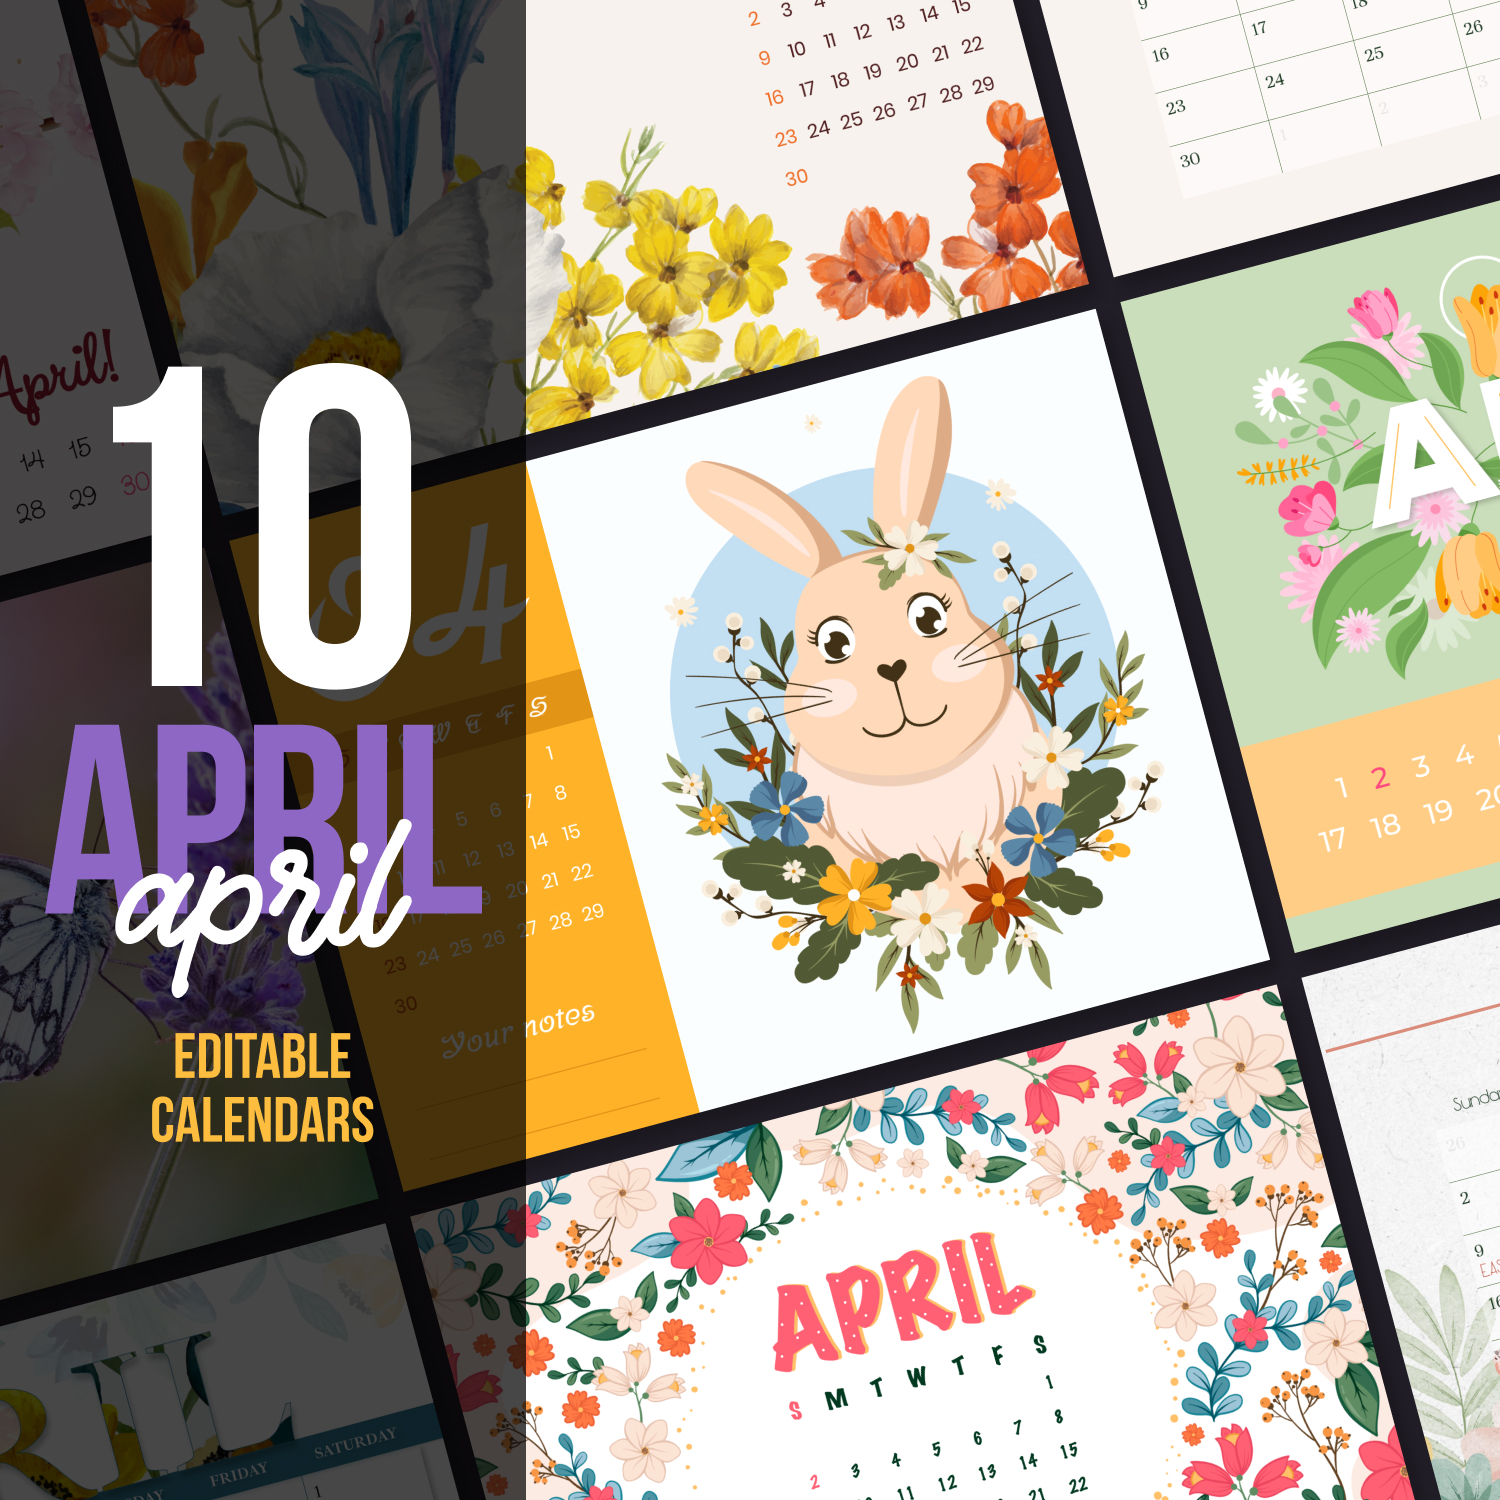 Bunch of calendars with flowers on them.